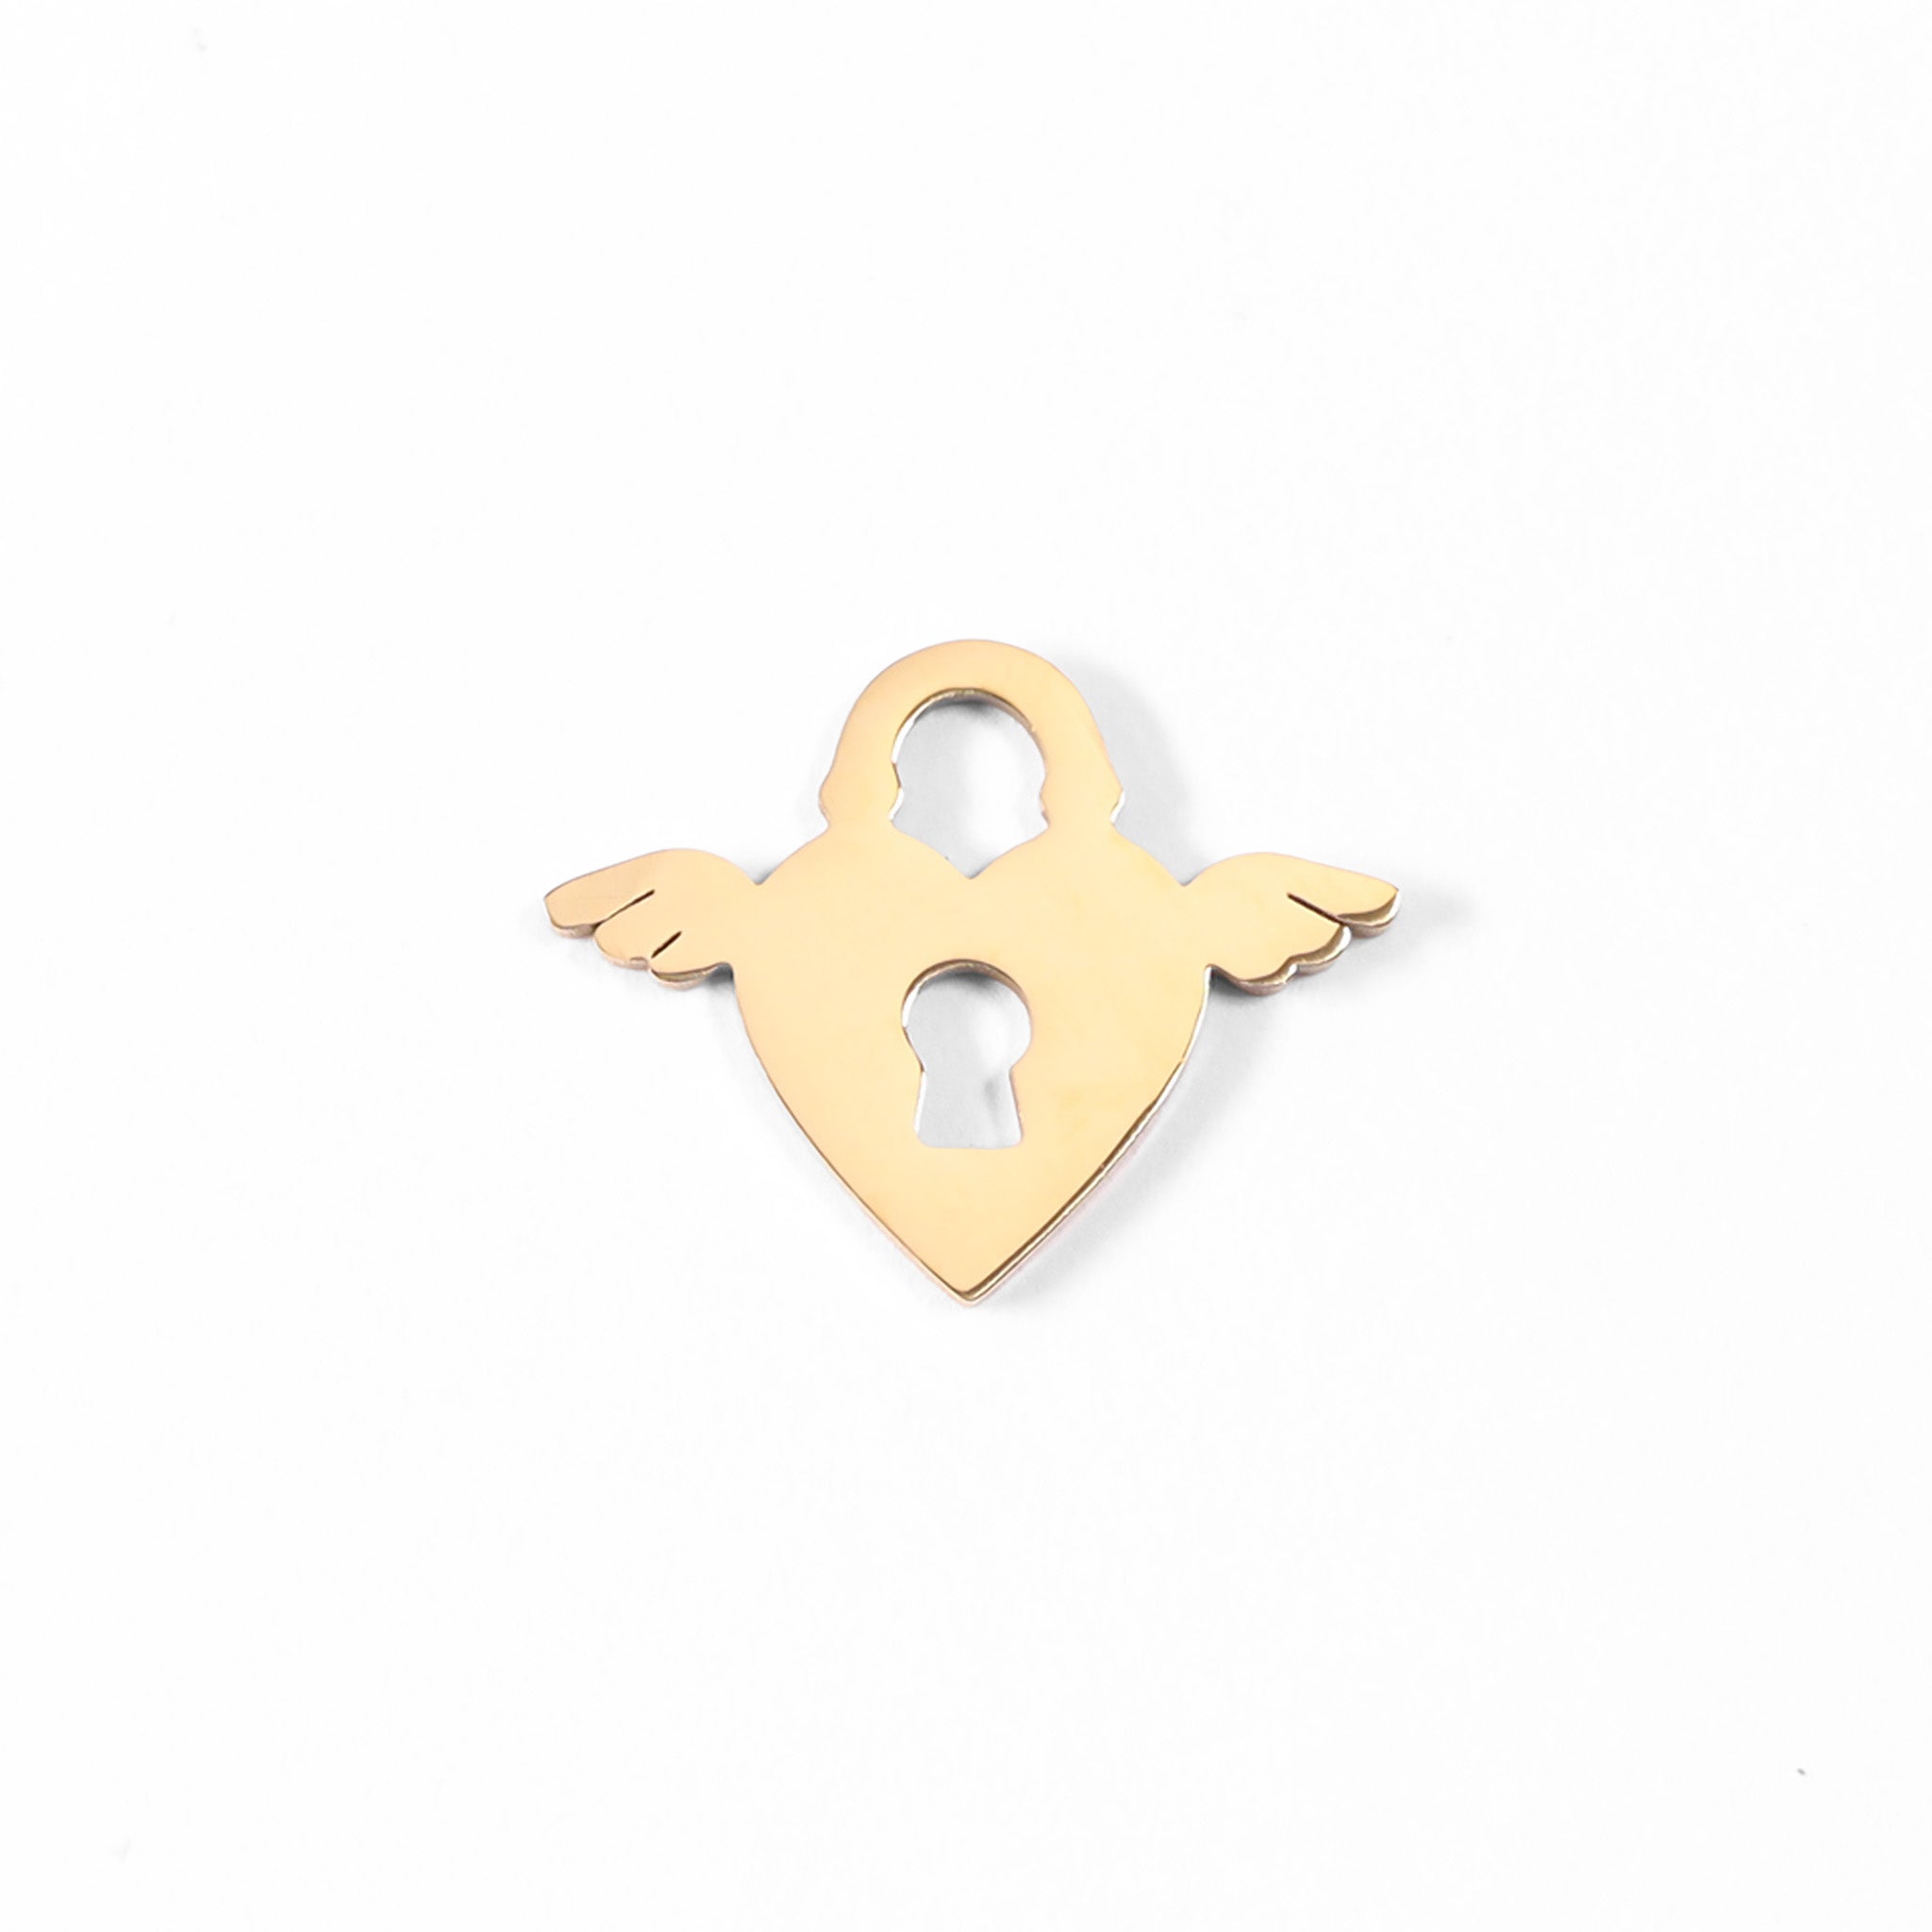 18K Gold PVD Stainless Steel Winged Heart Lock Charm / PDL0087